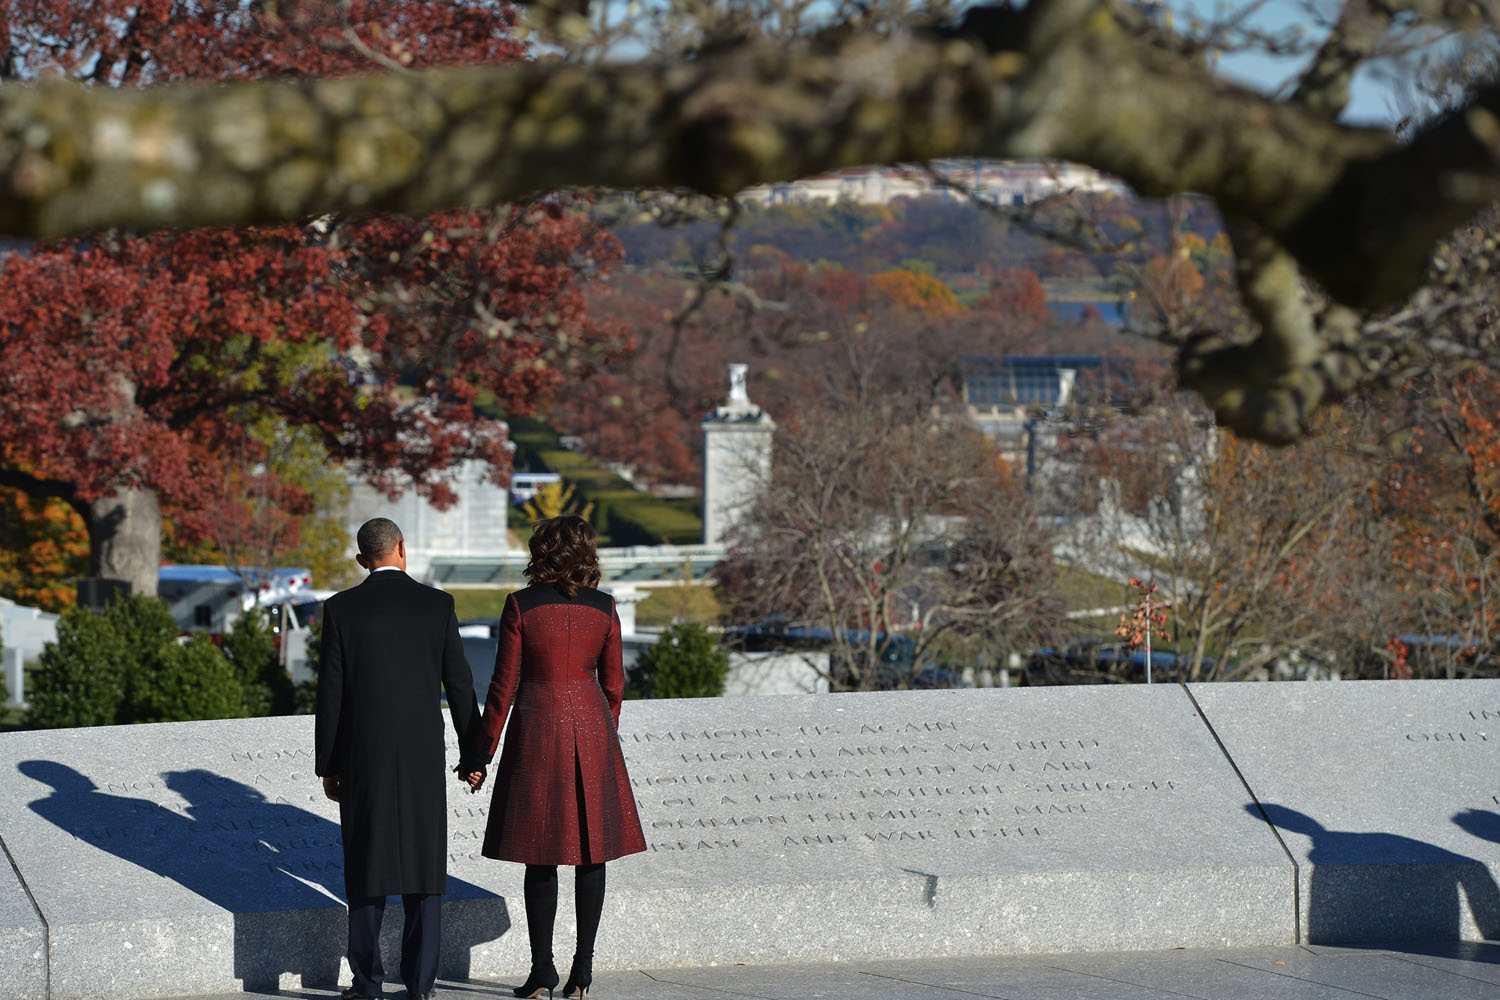 Nov. 20, 2013. U.S. President Barack Obama and First Lady Michelle Obama read an inscription after taking part in a wreath-laying ceremony in honor of the late U.S. President John F. Kennedy at Arlington National Cemetery in Arlington, Virginia.